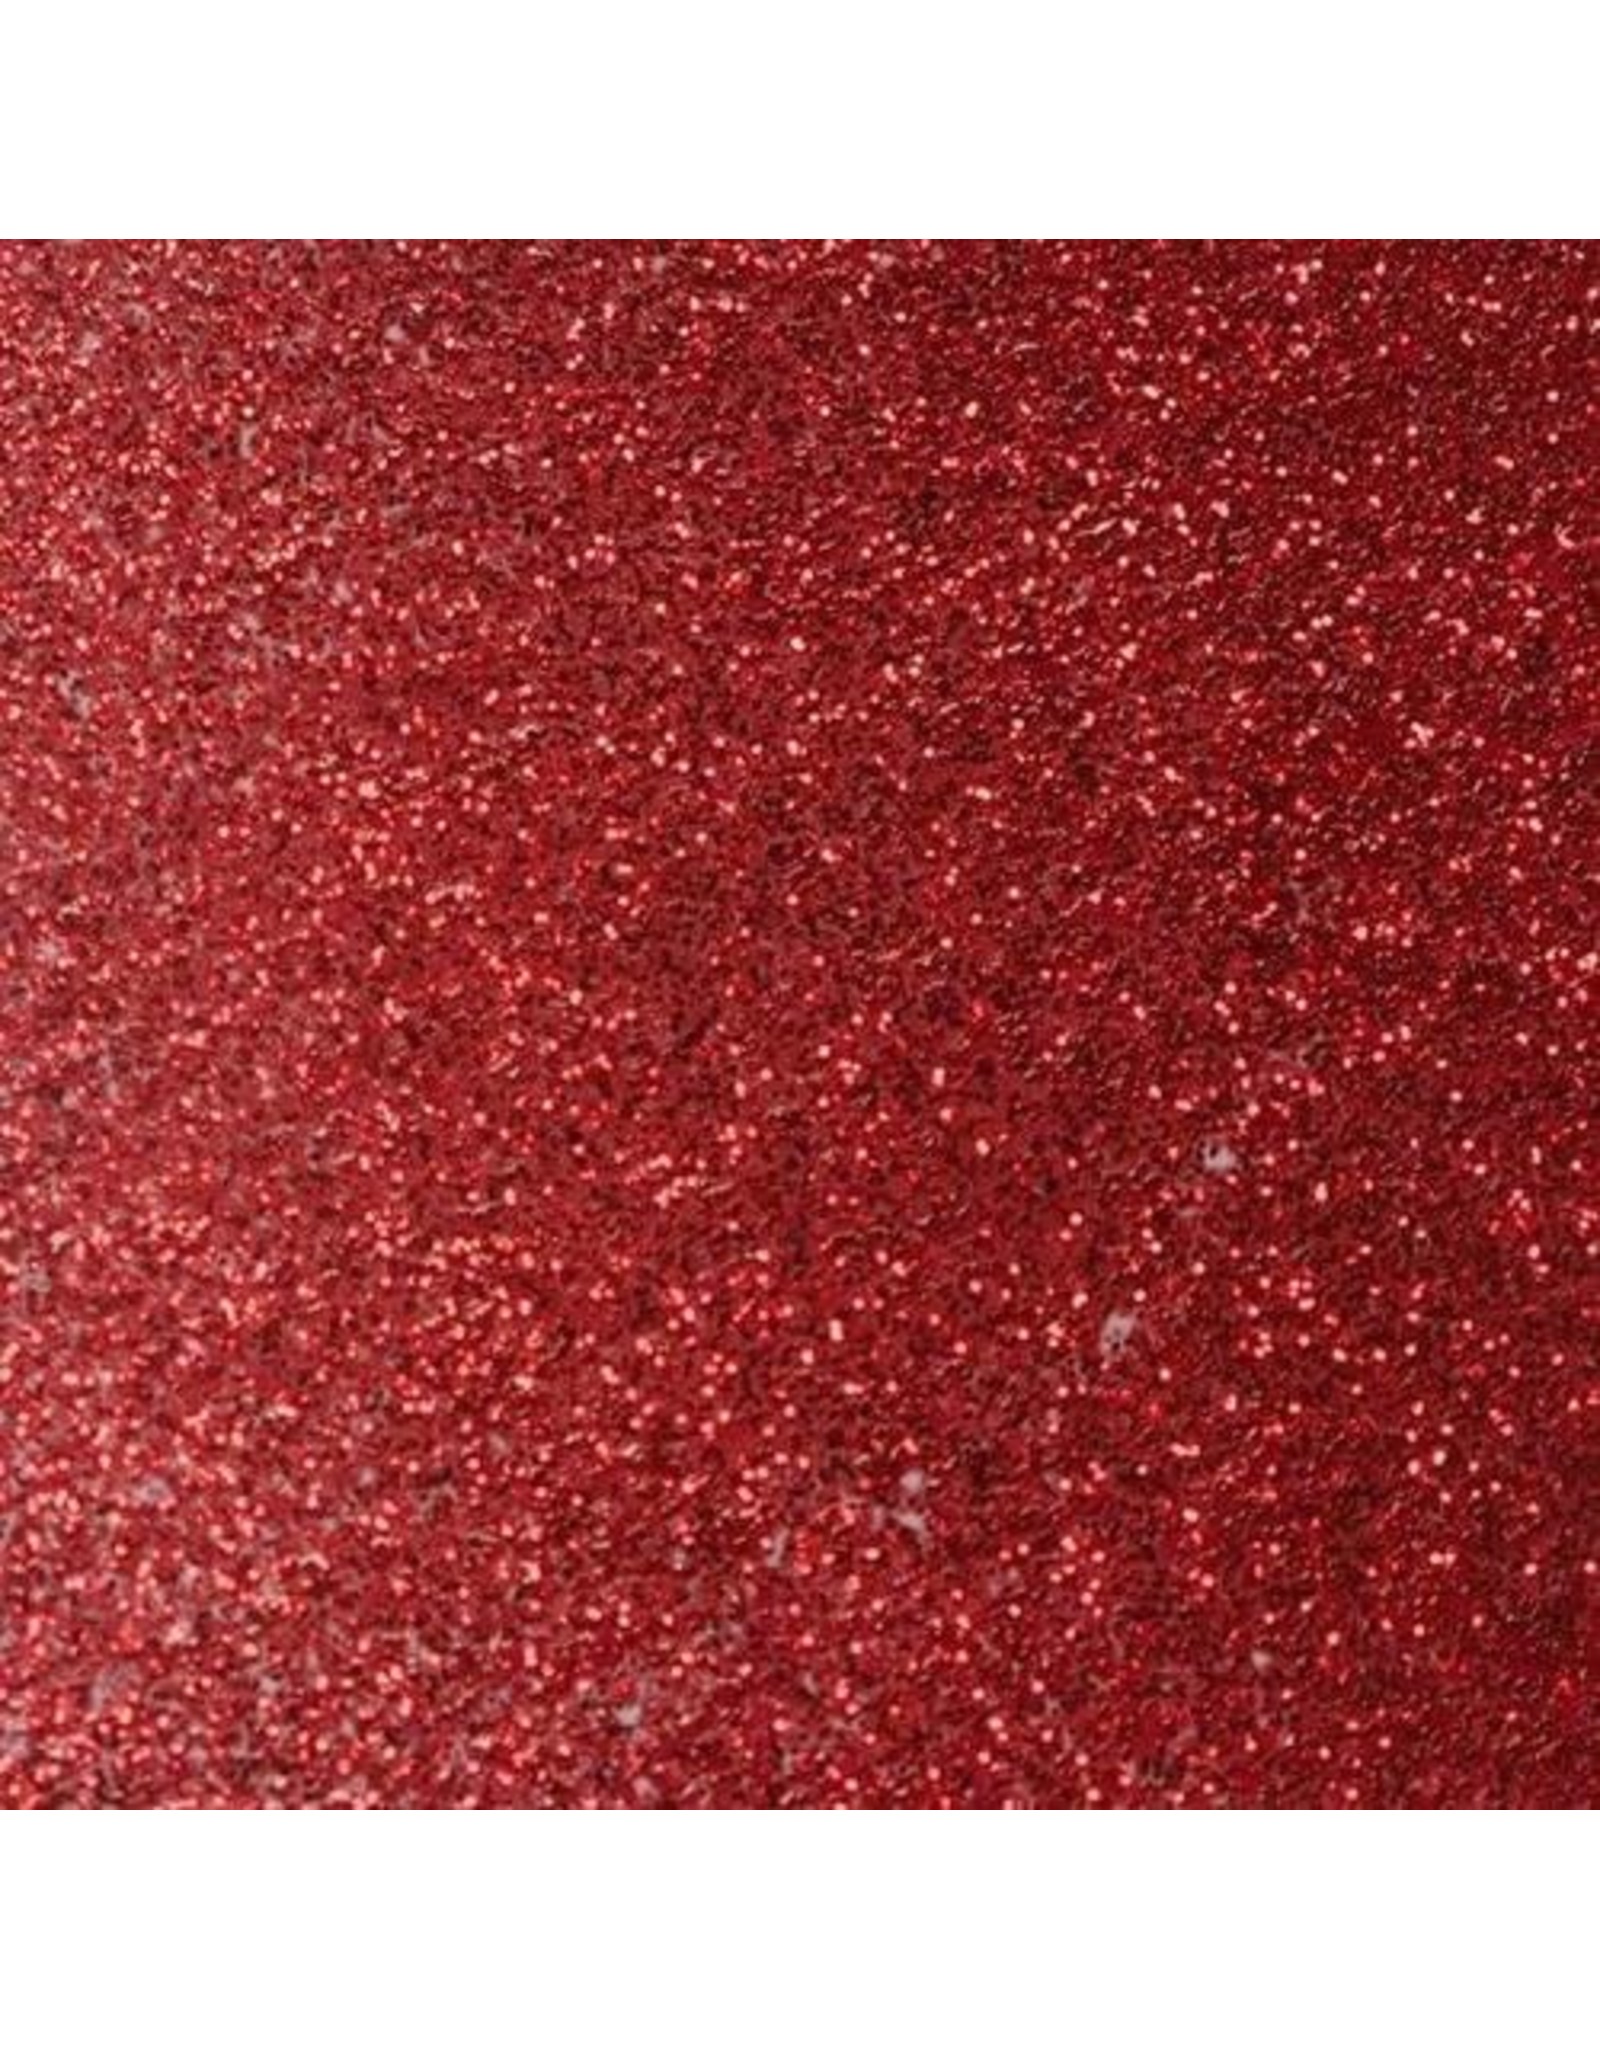 CREATIVE EXPRESSIONS CREATIVE EXPRESSION COSMIC SHIMMER RUBY SLIPPERS BRILLIANT SPARKLE EMBOSSING POWDER 20ML